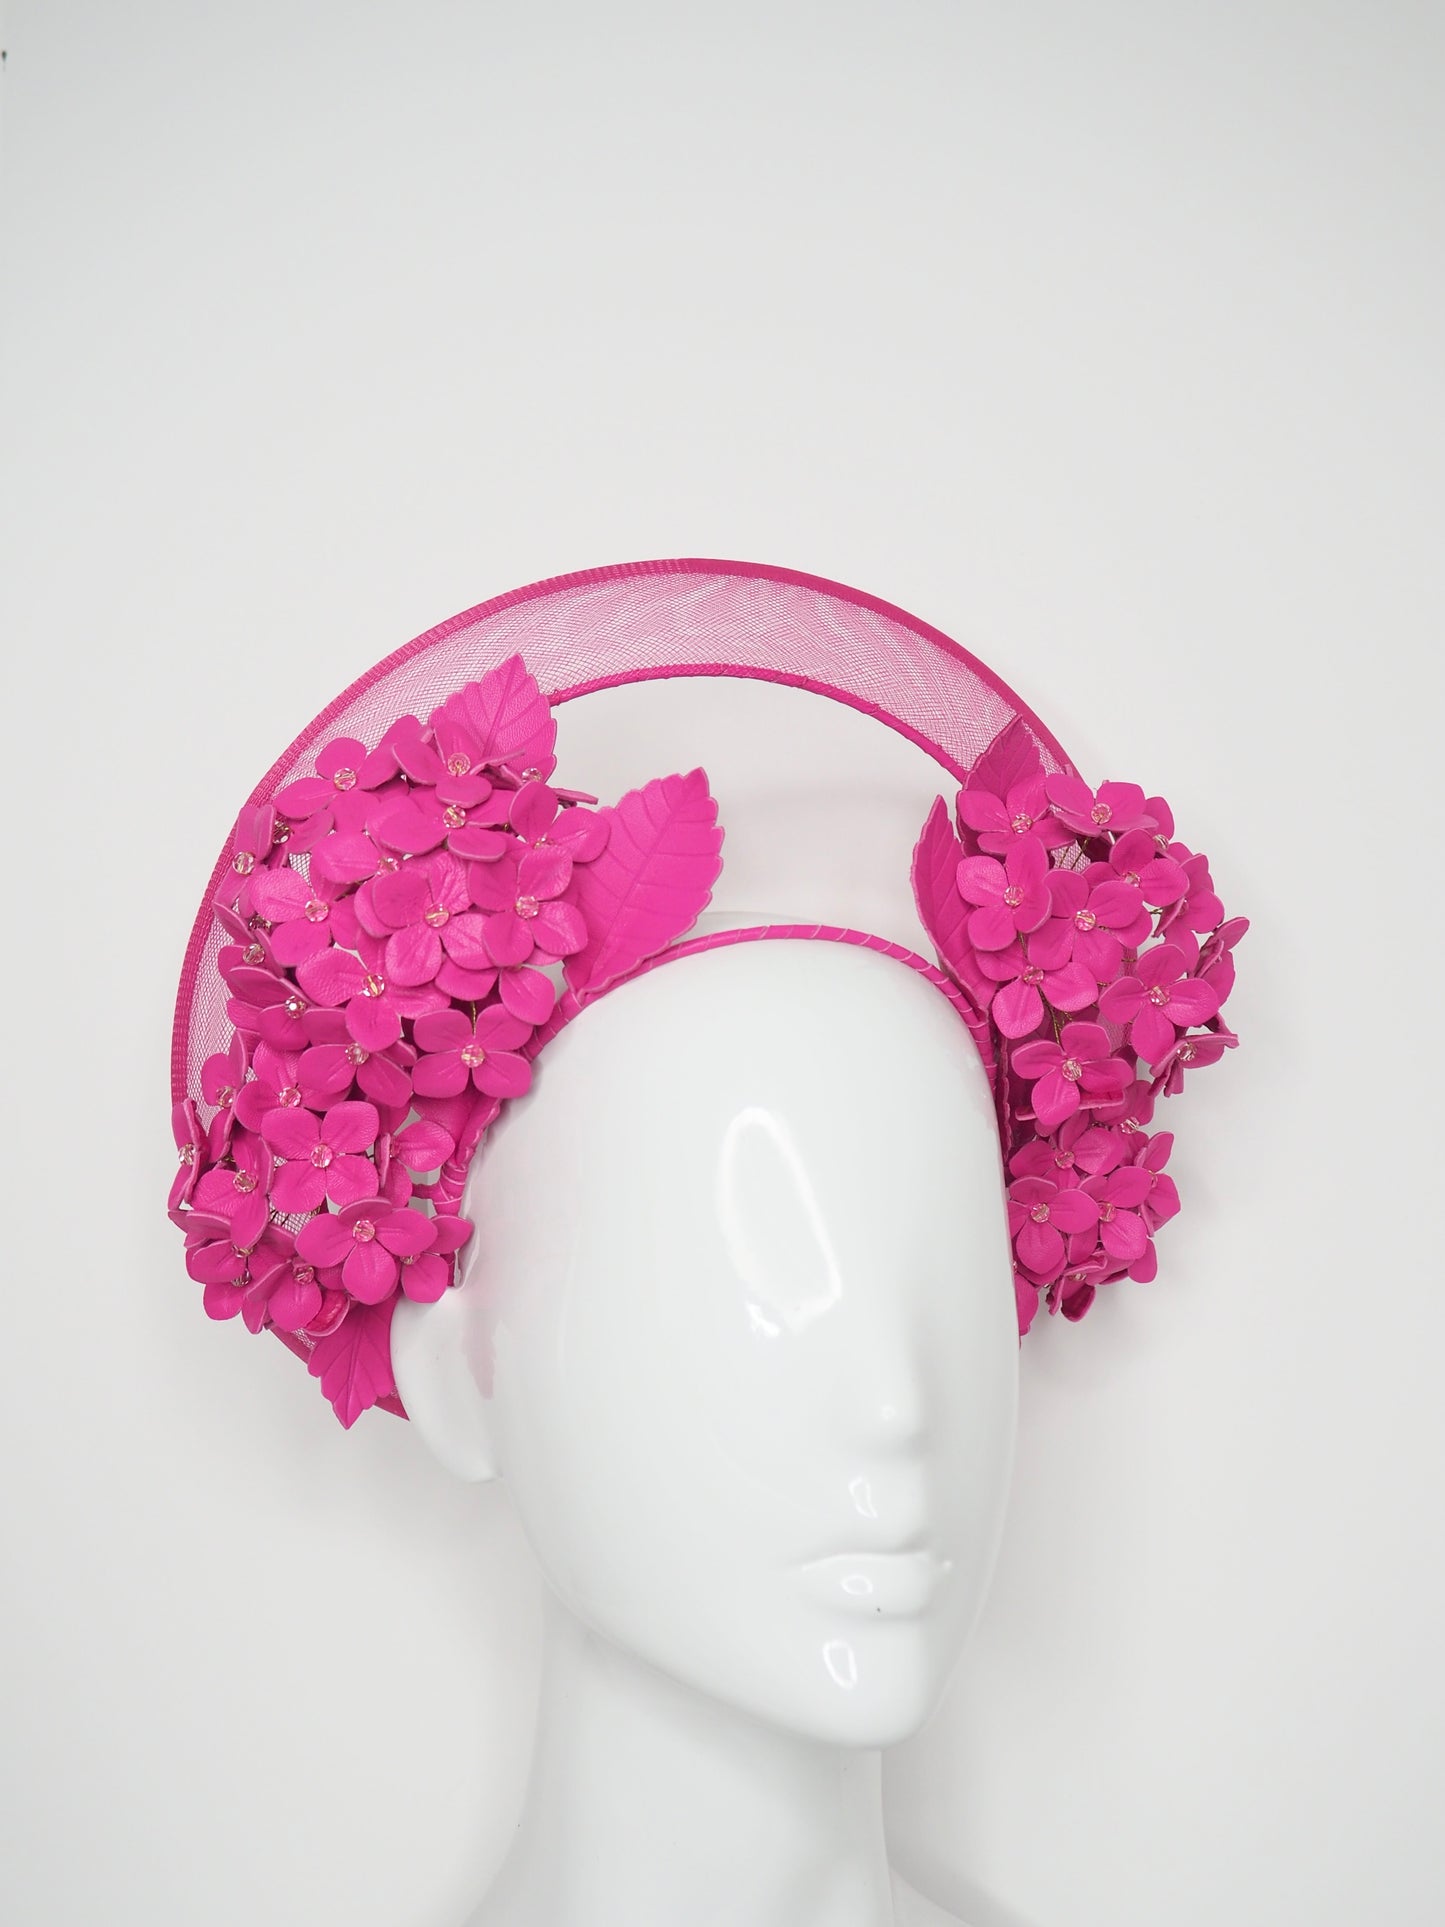 Perfectly pink- Hydrangea wired Halo headpiece